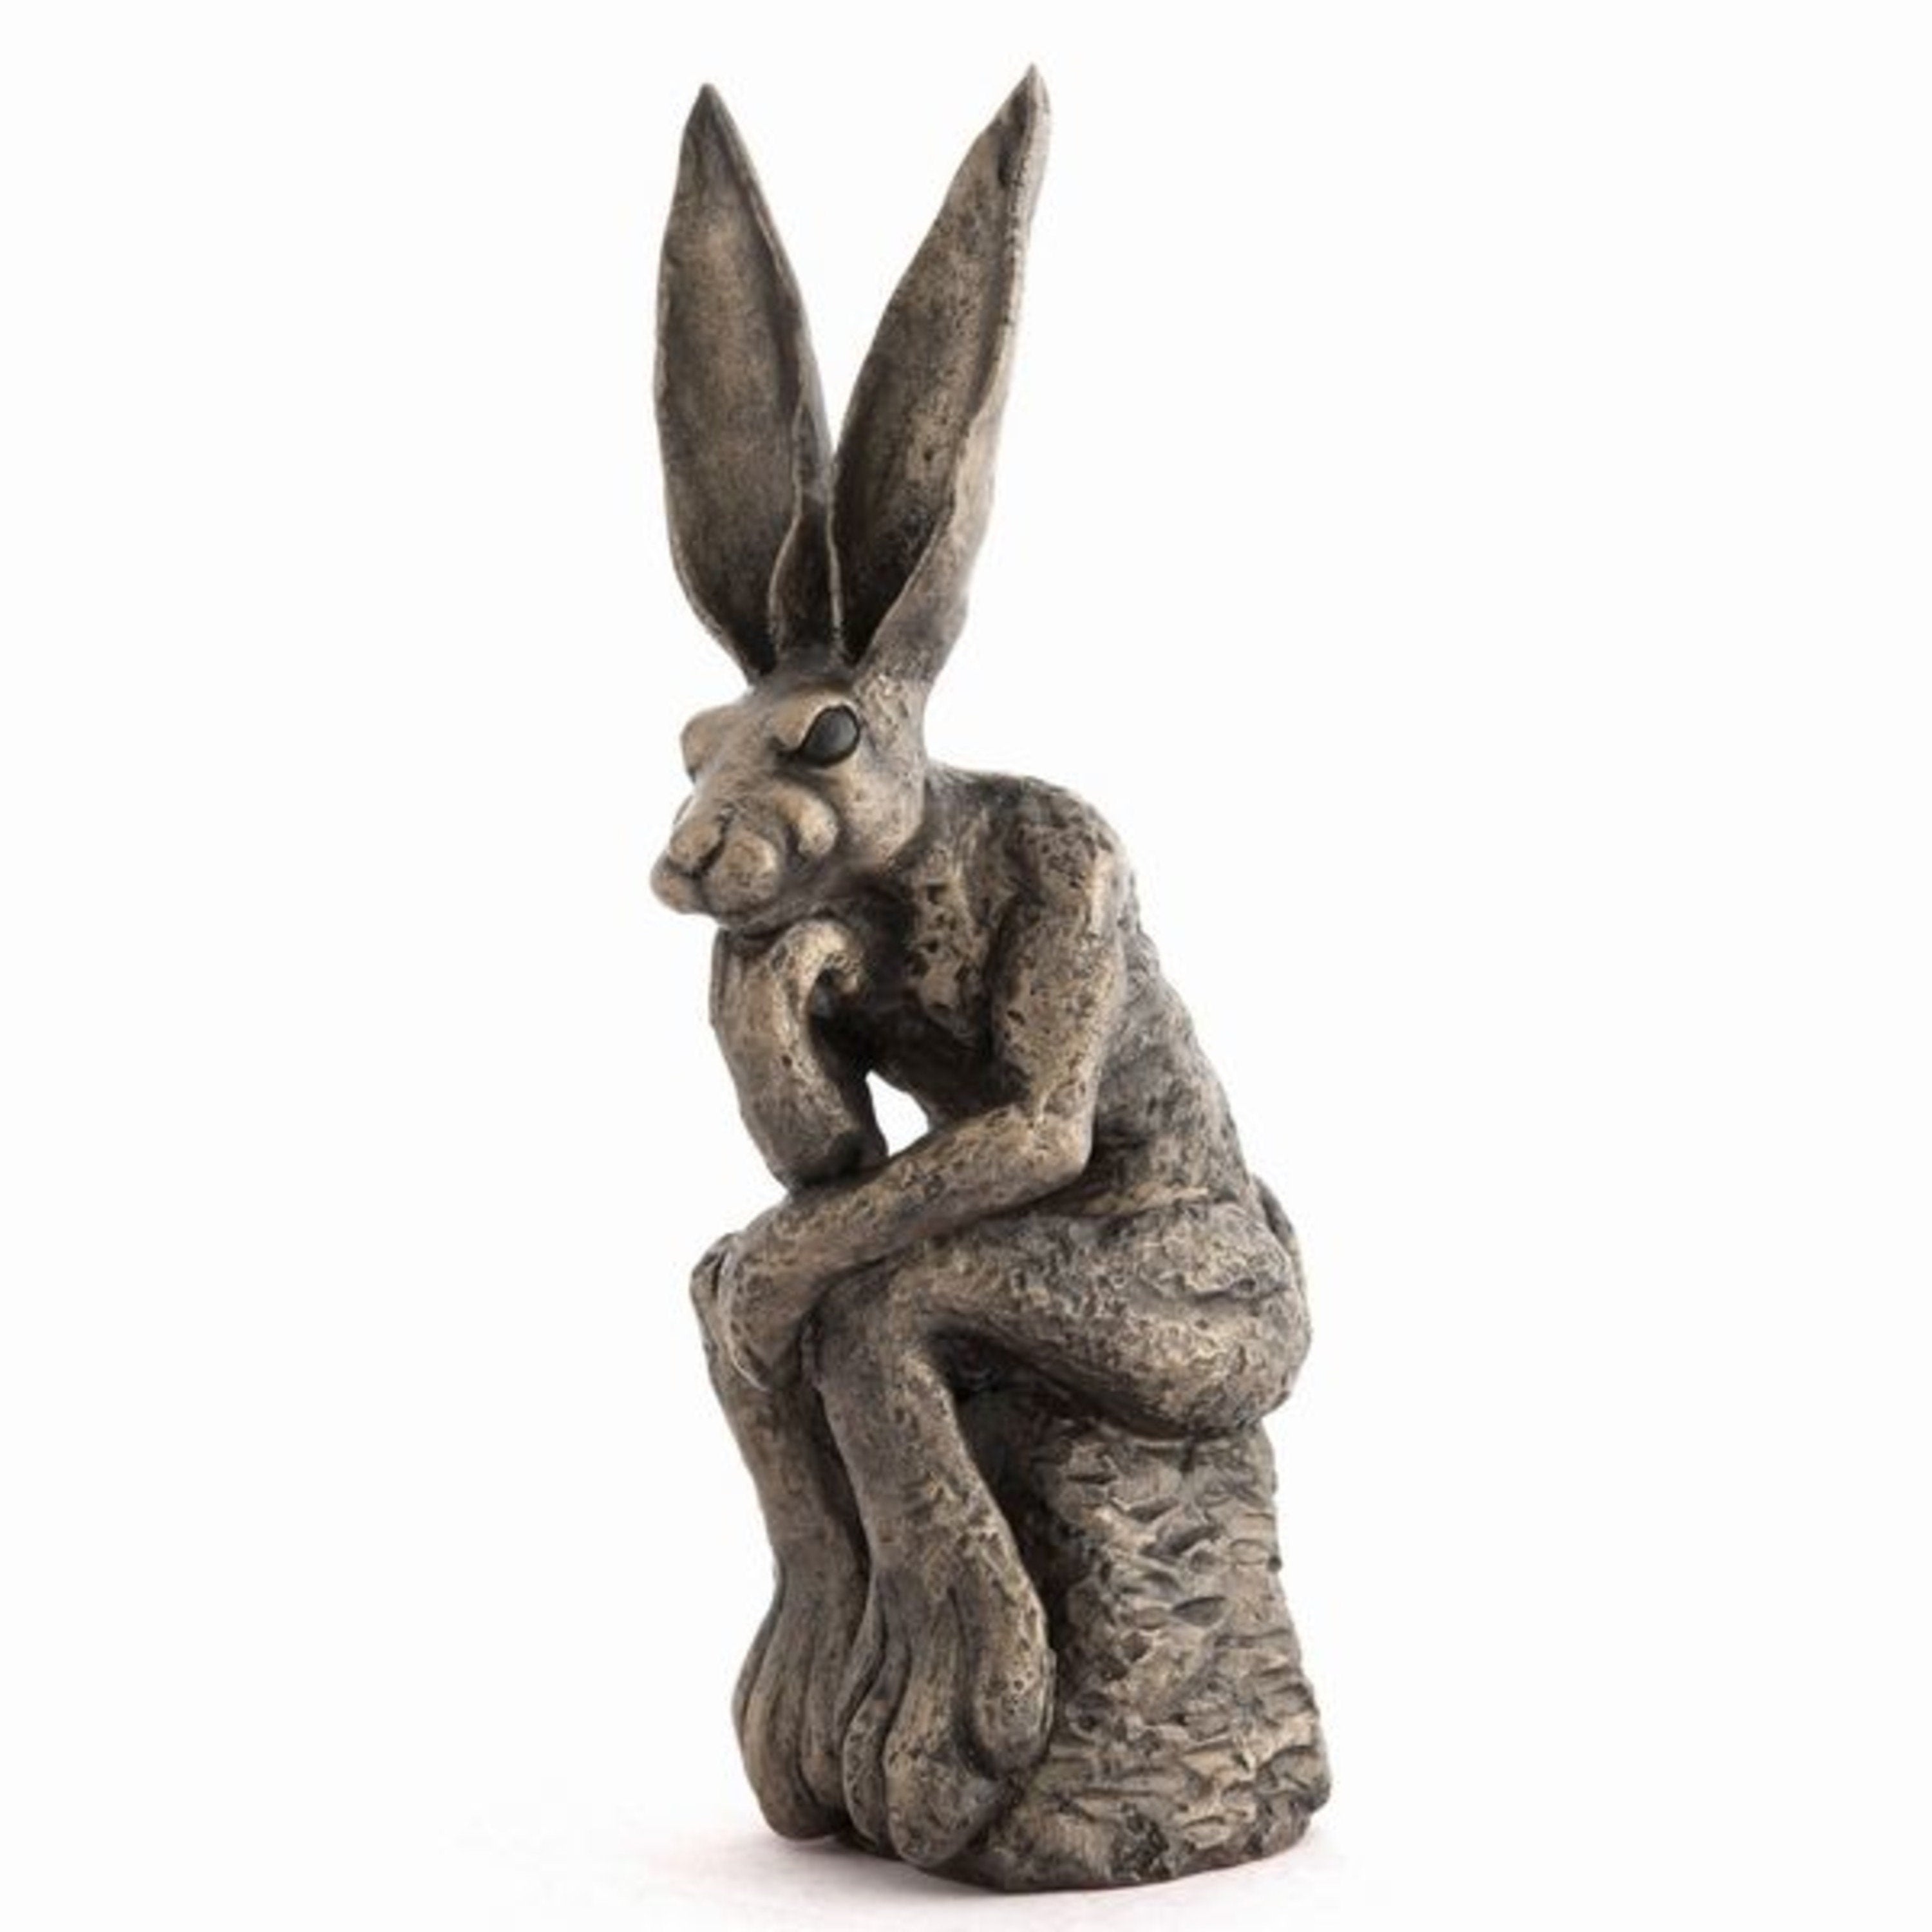 The Thinker Hare Sculpture (Old Masters) Bronze Ornament Home Decor Birthday Gift